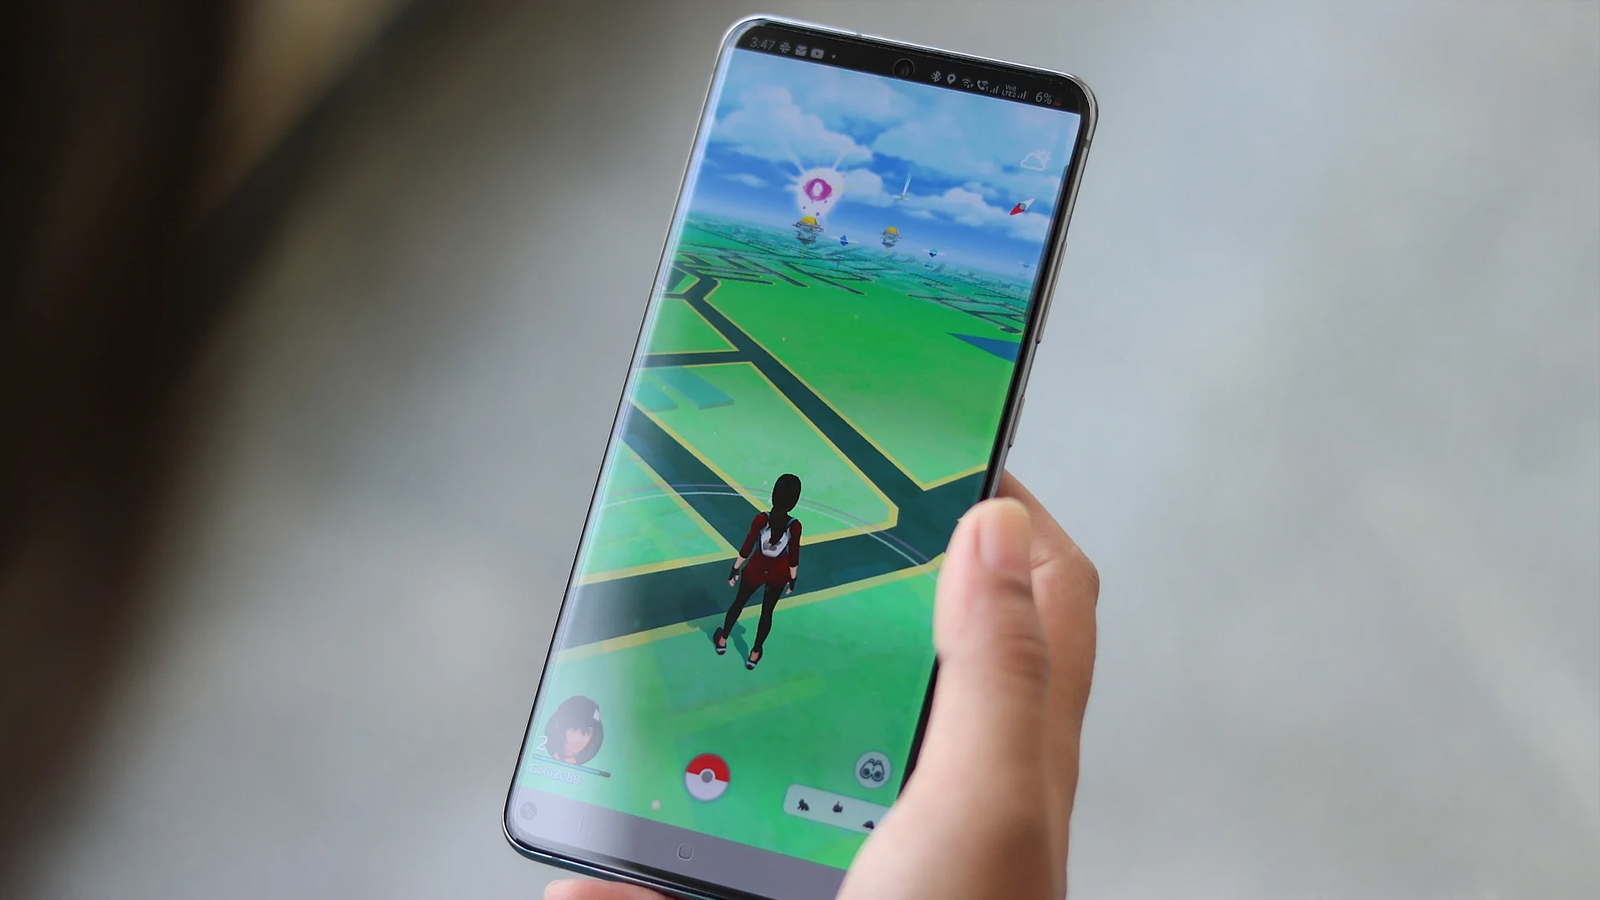 Samsung just launched a Pokémon collection and I want 'em all